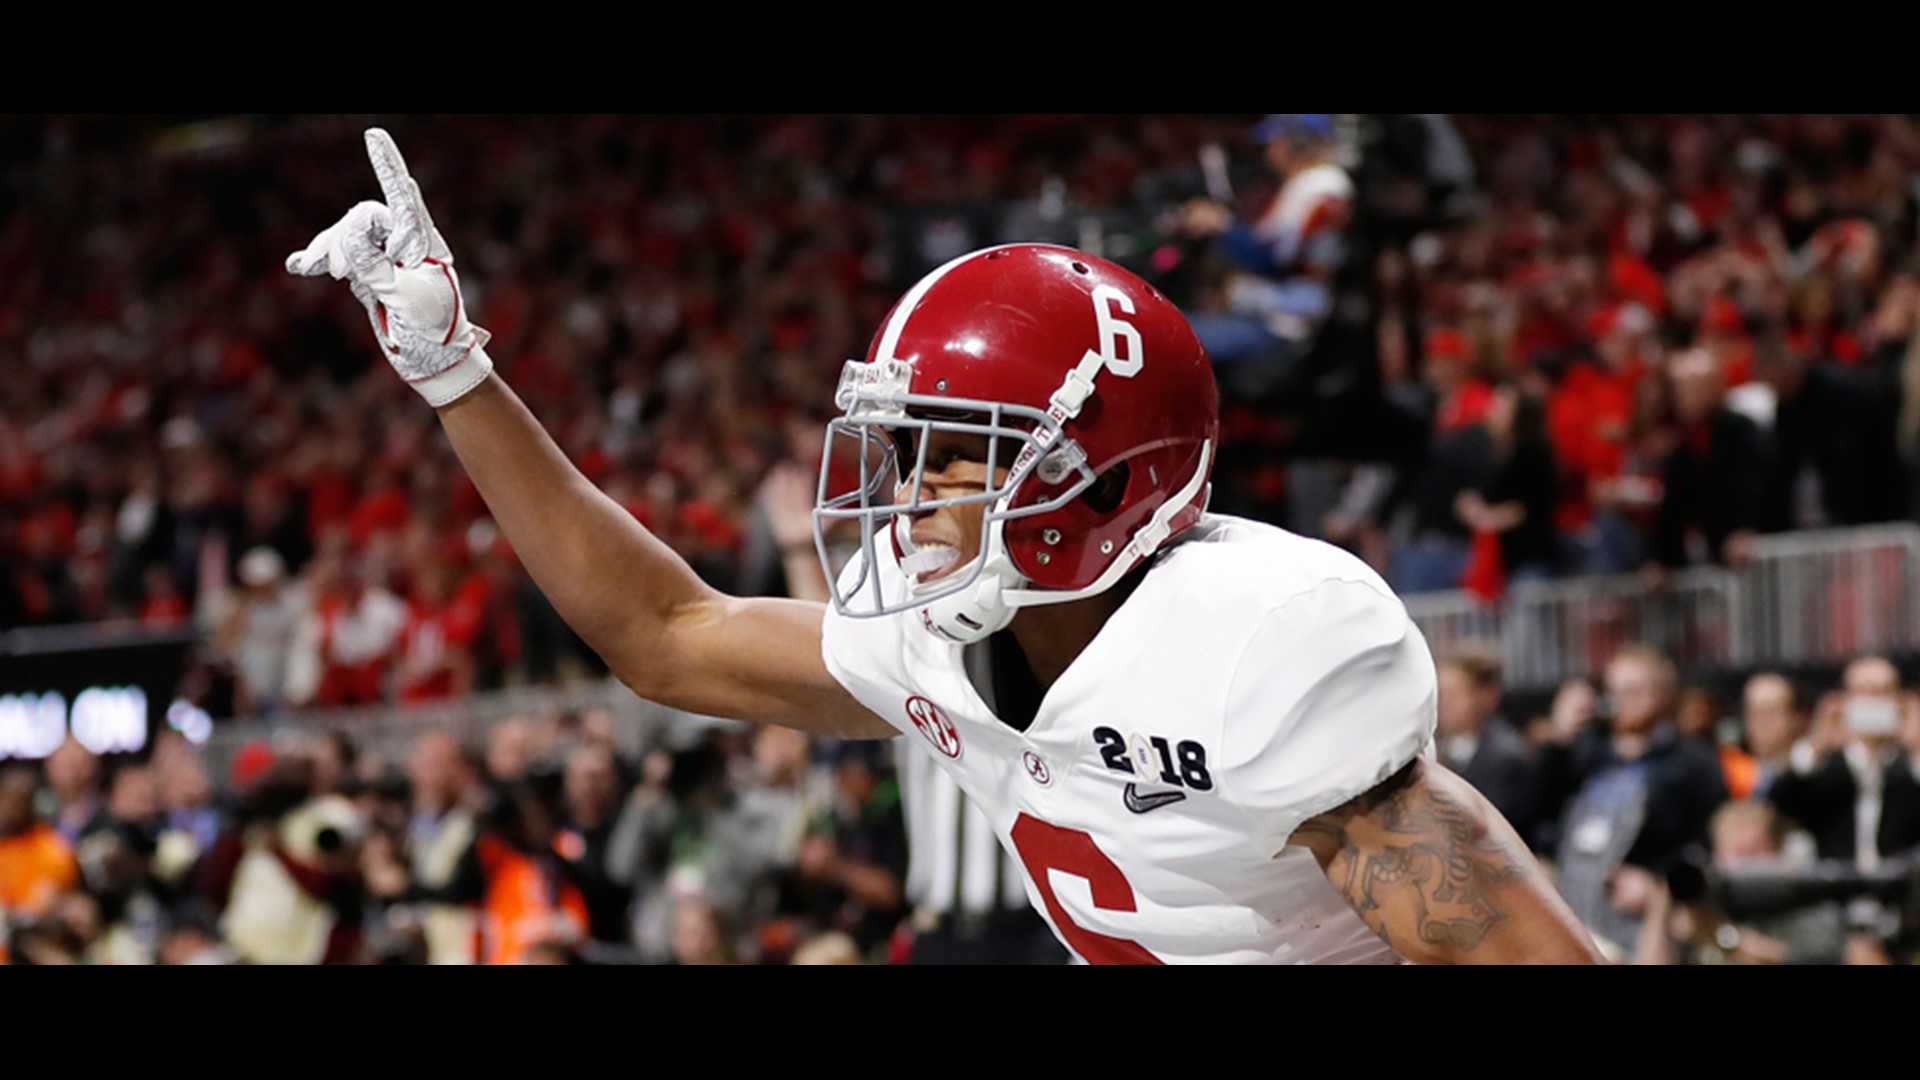 Alabama wins national championship with thrilling overtime comeback